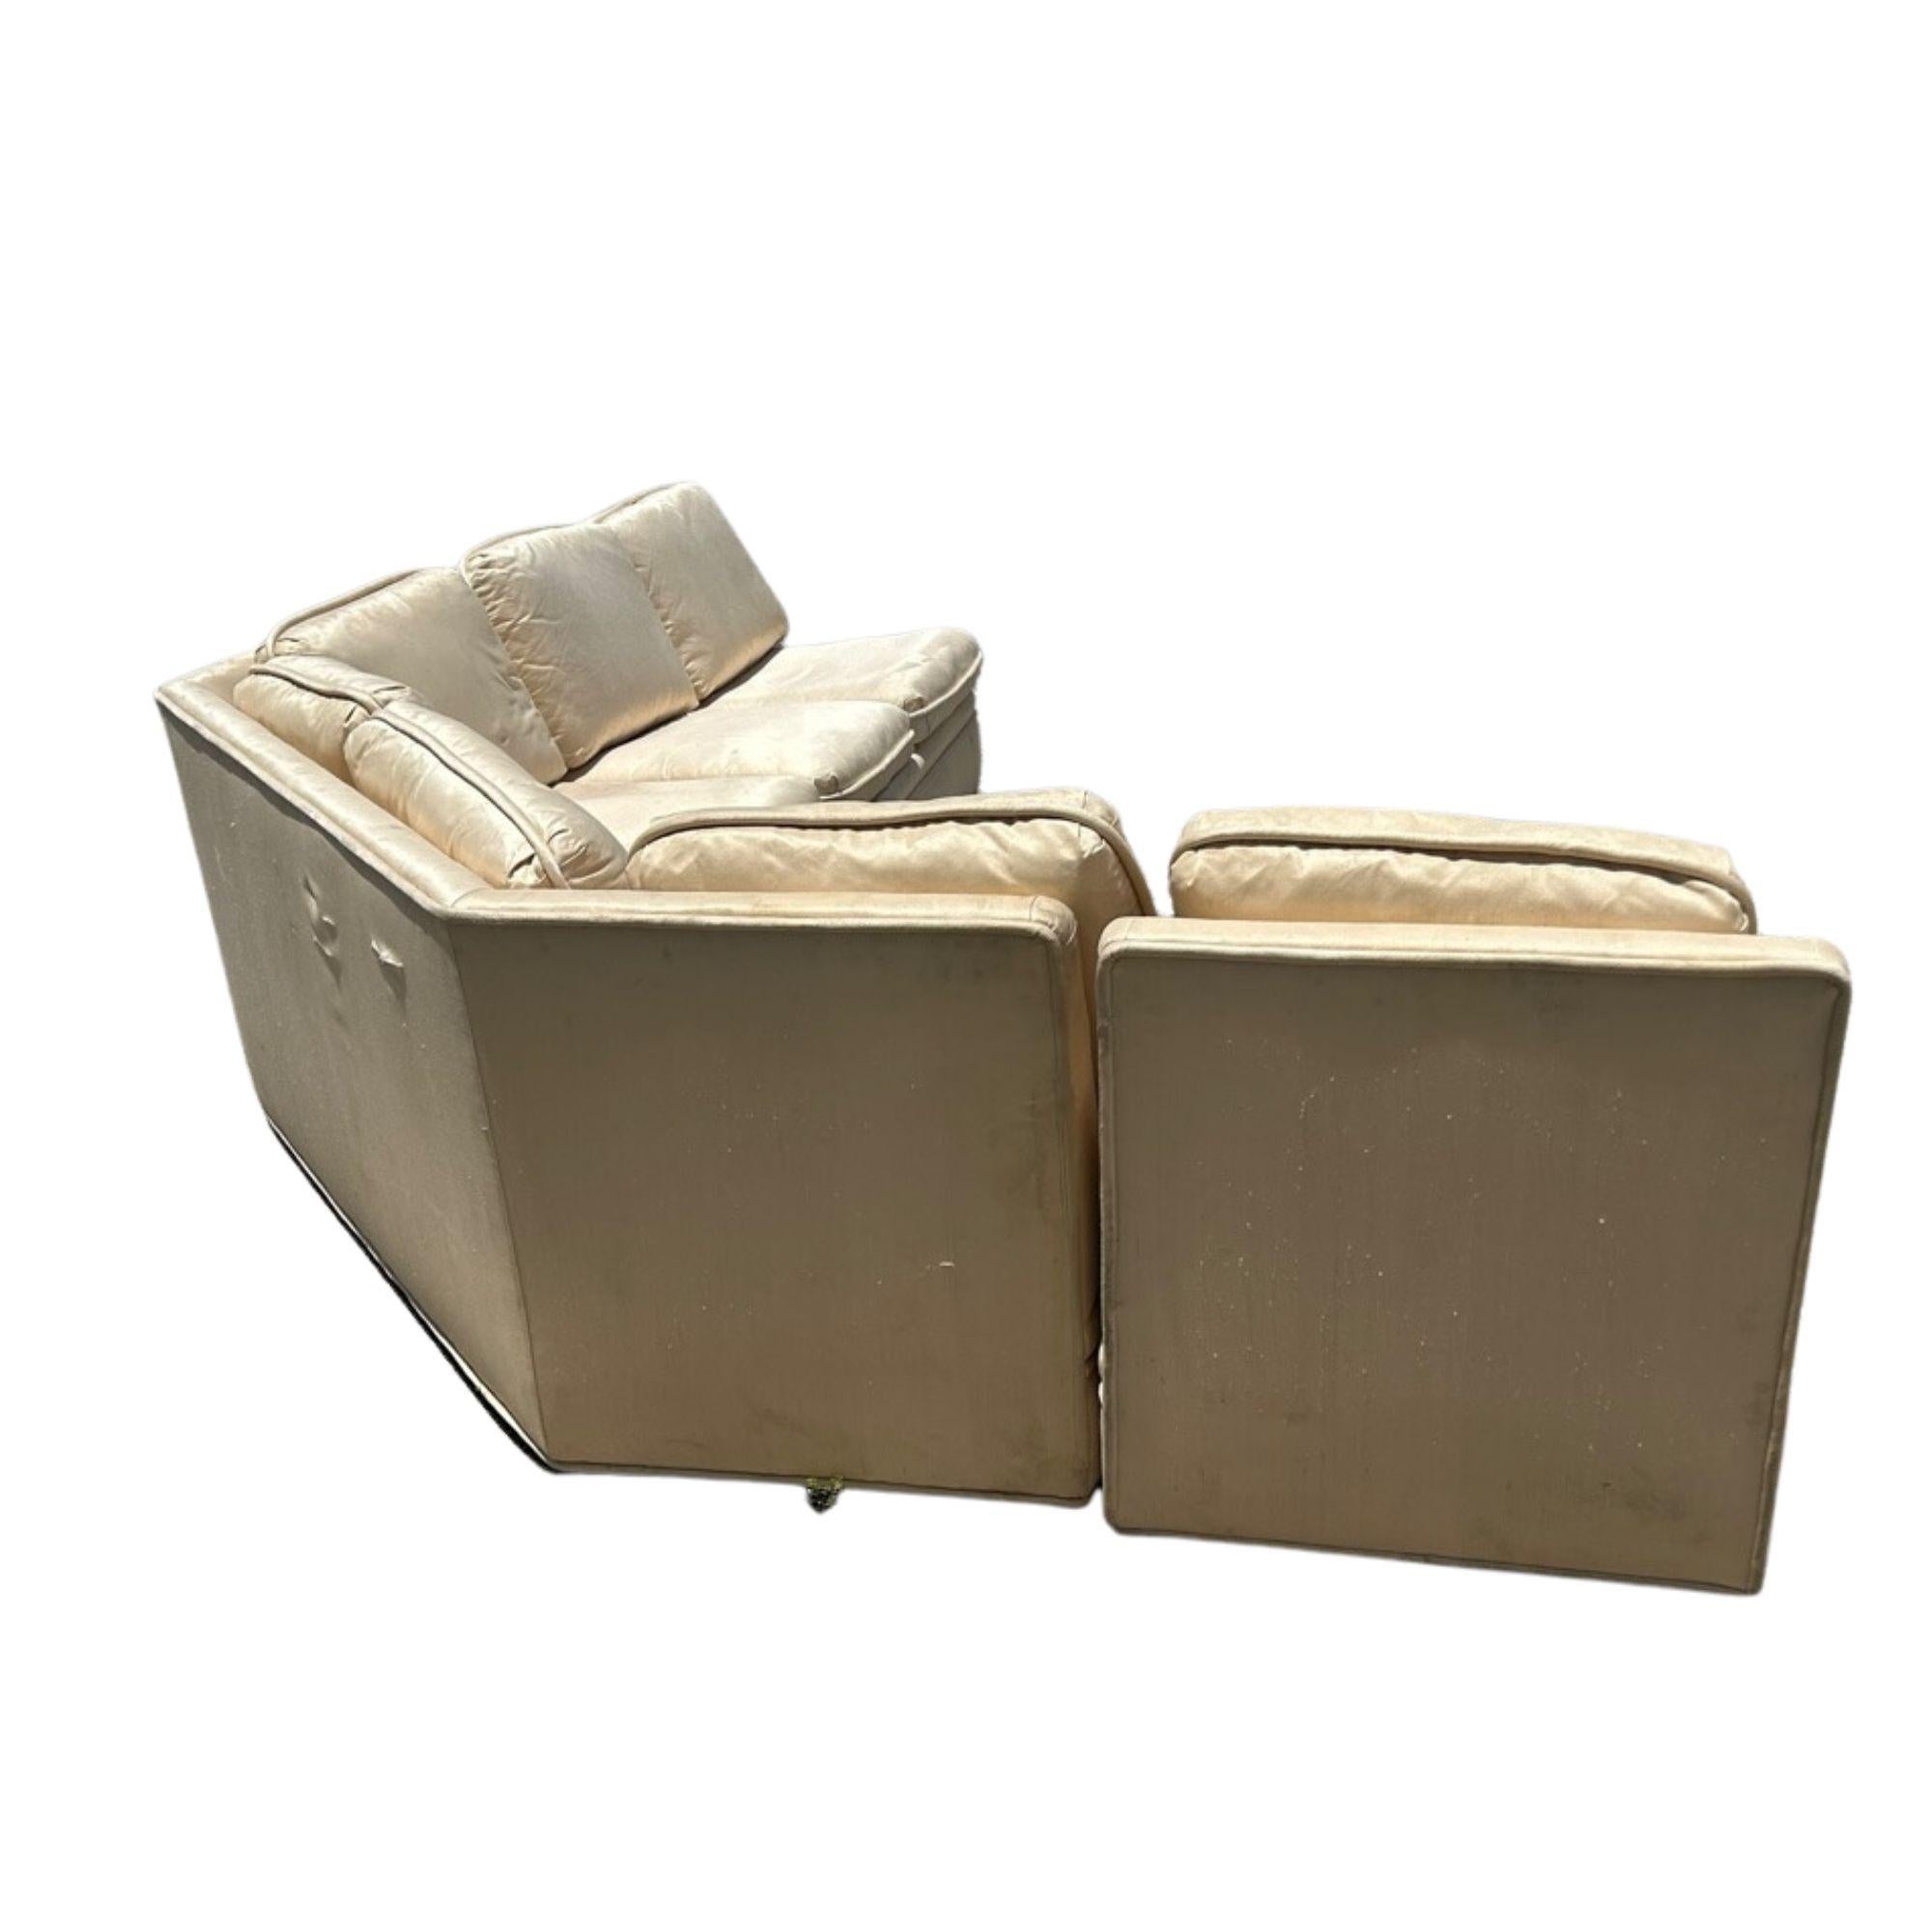 Large Semi-Curved Baker Furniture sectional with separate parts 